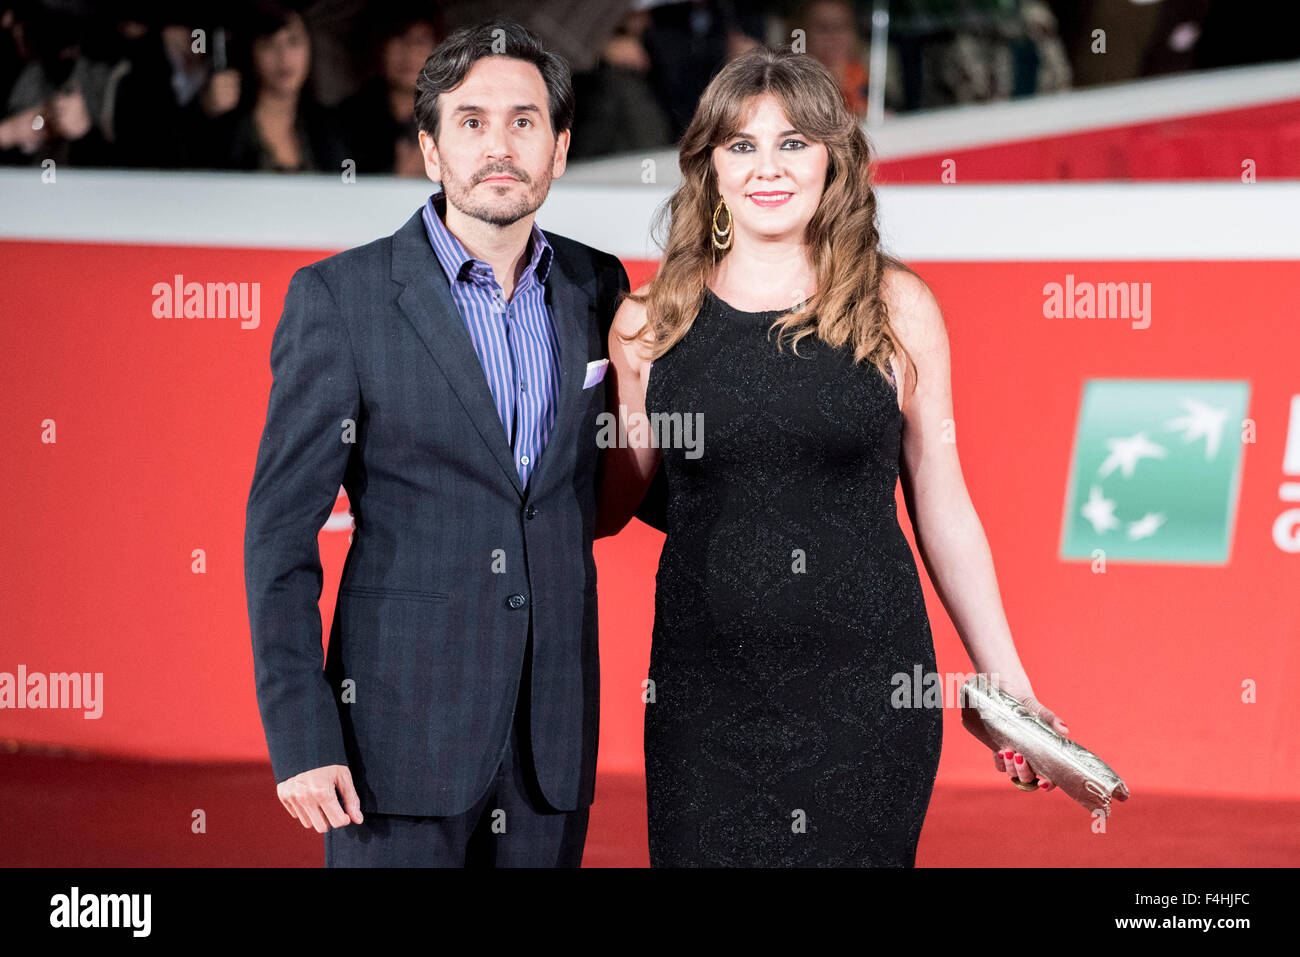 Rome, Italy. 18th Oct, 2015. 'Freeheld' Red Carpet at 10th Rome Film Festival at Auditorium Parco della Musica on October 18, 2015 in Rome, Italy. Pictured: Peter Sollett. Credit:  Massimo Valicchia/Alamy Live News Stock Photo